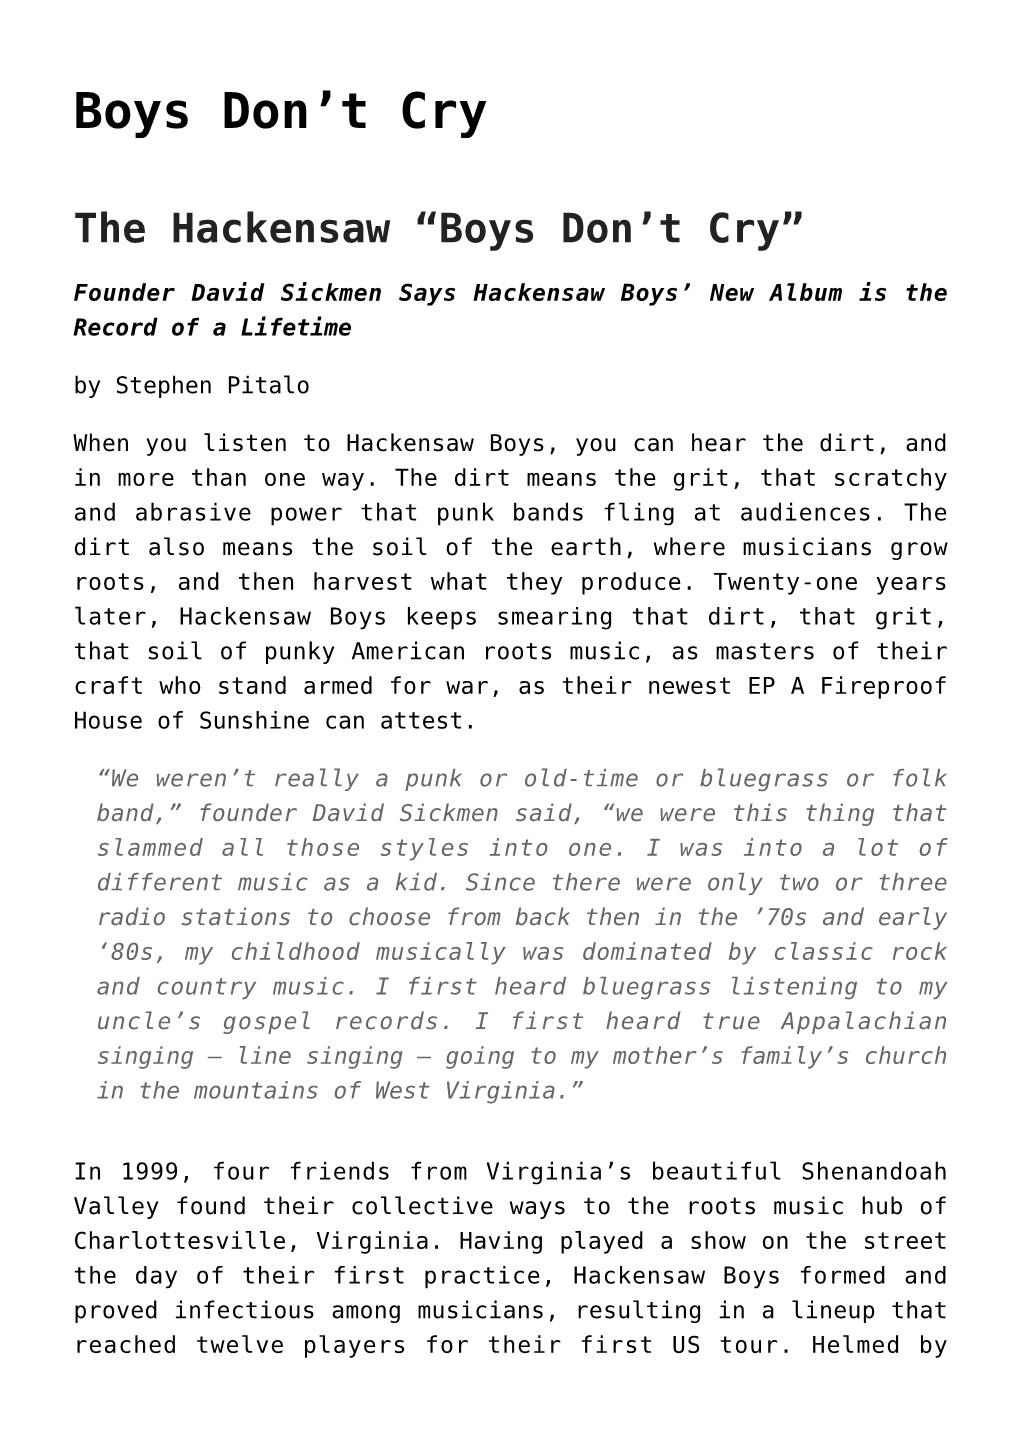 The Hackensaw “Boys Don't Cry”